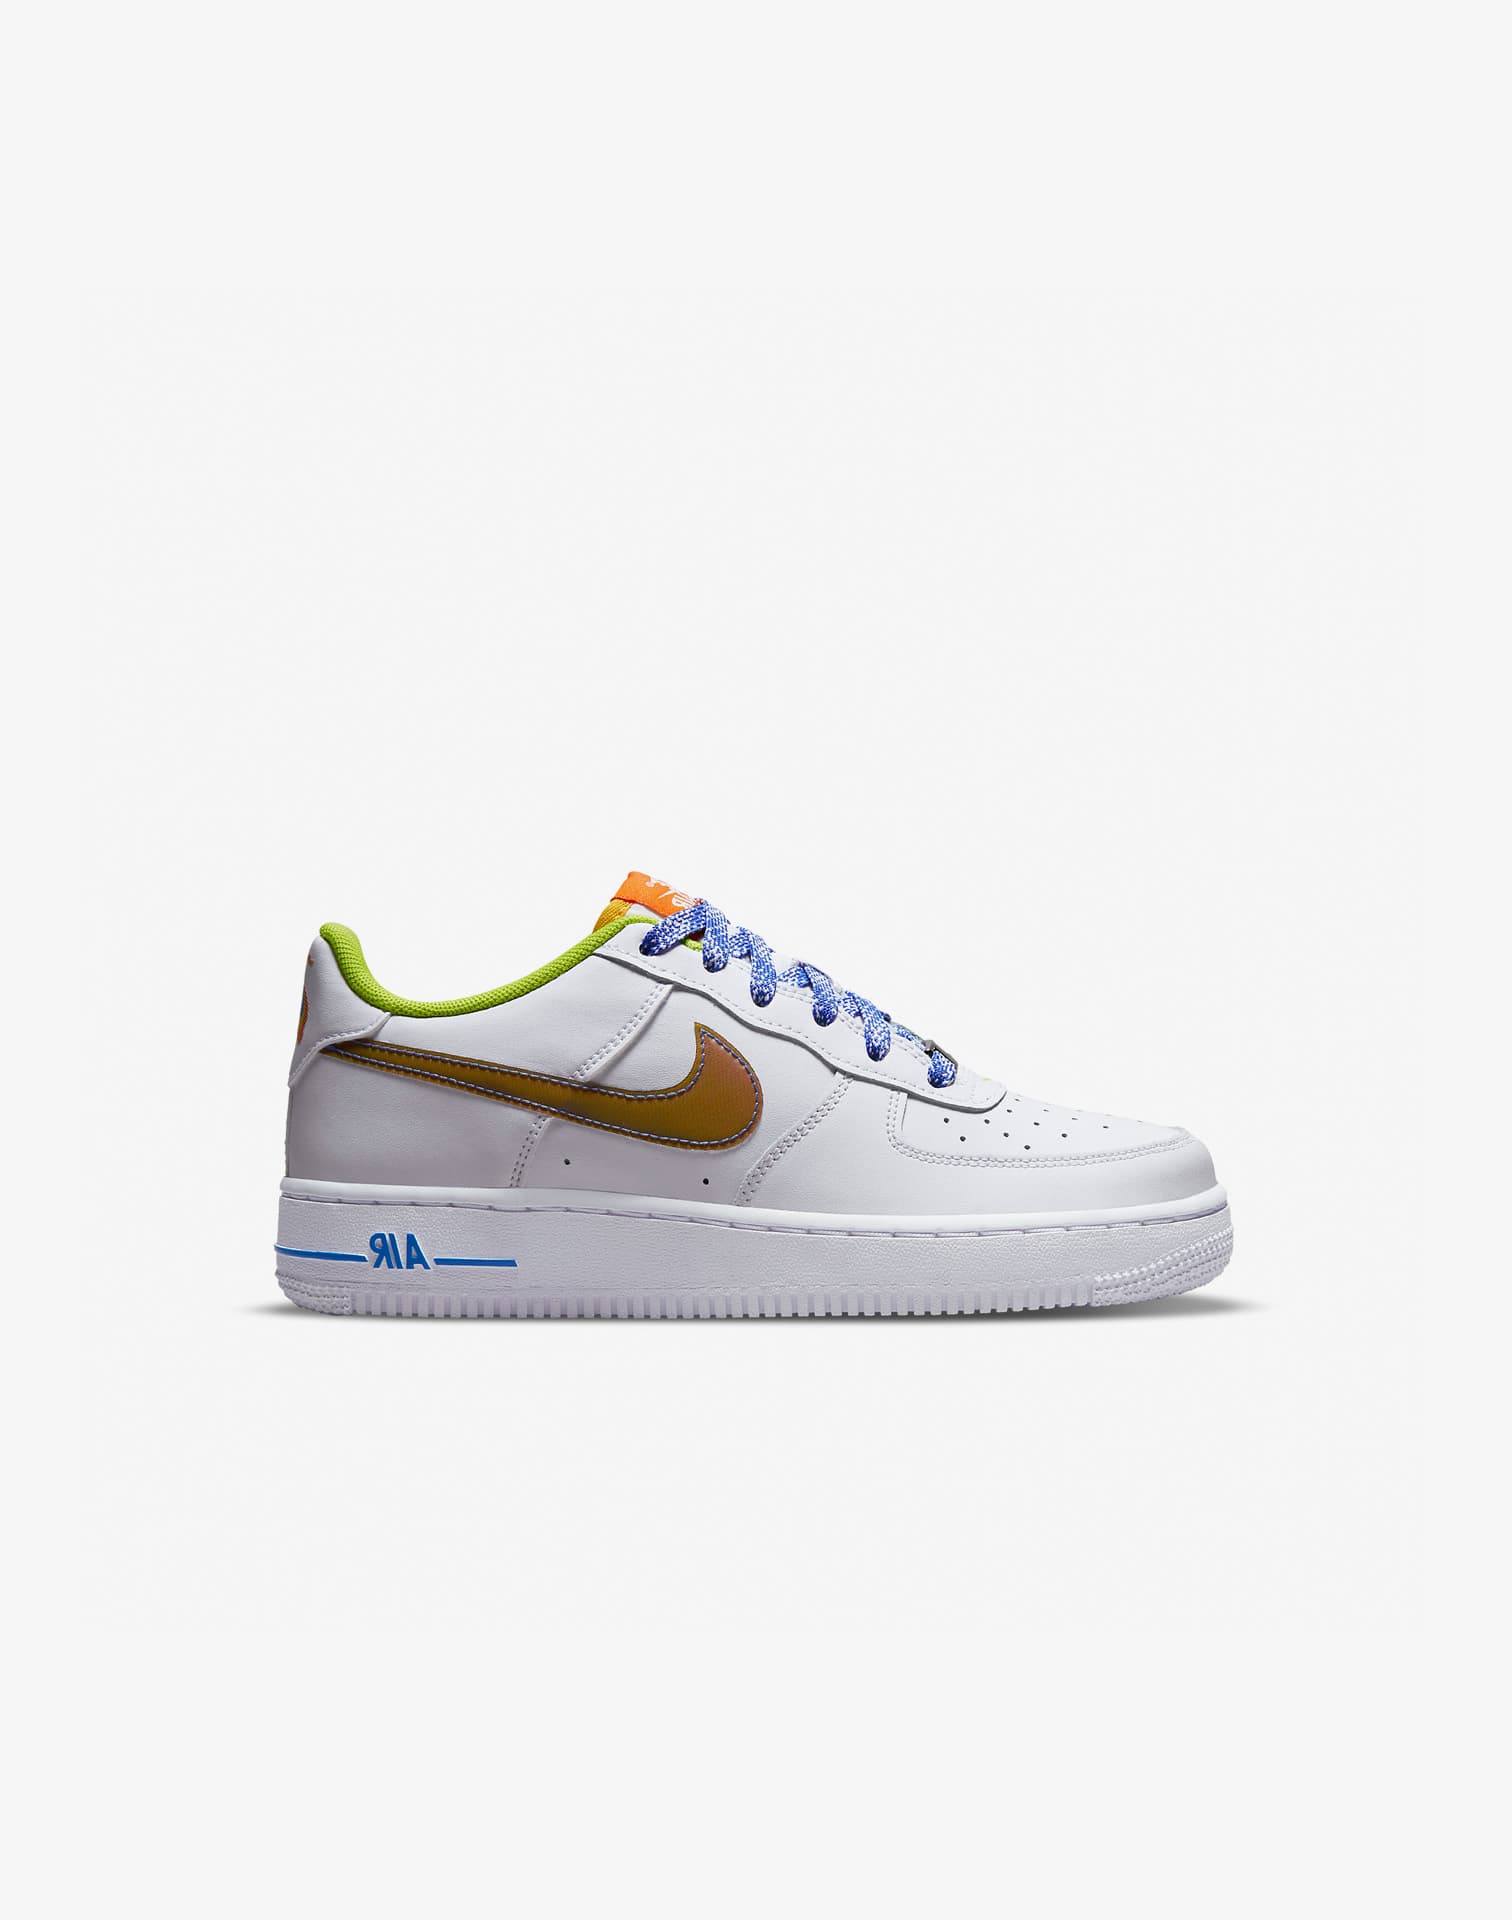 Nike Air Force 1 “What's The LA” for Sale in Hiram, GA - OfferUp